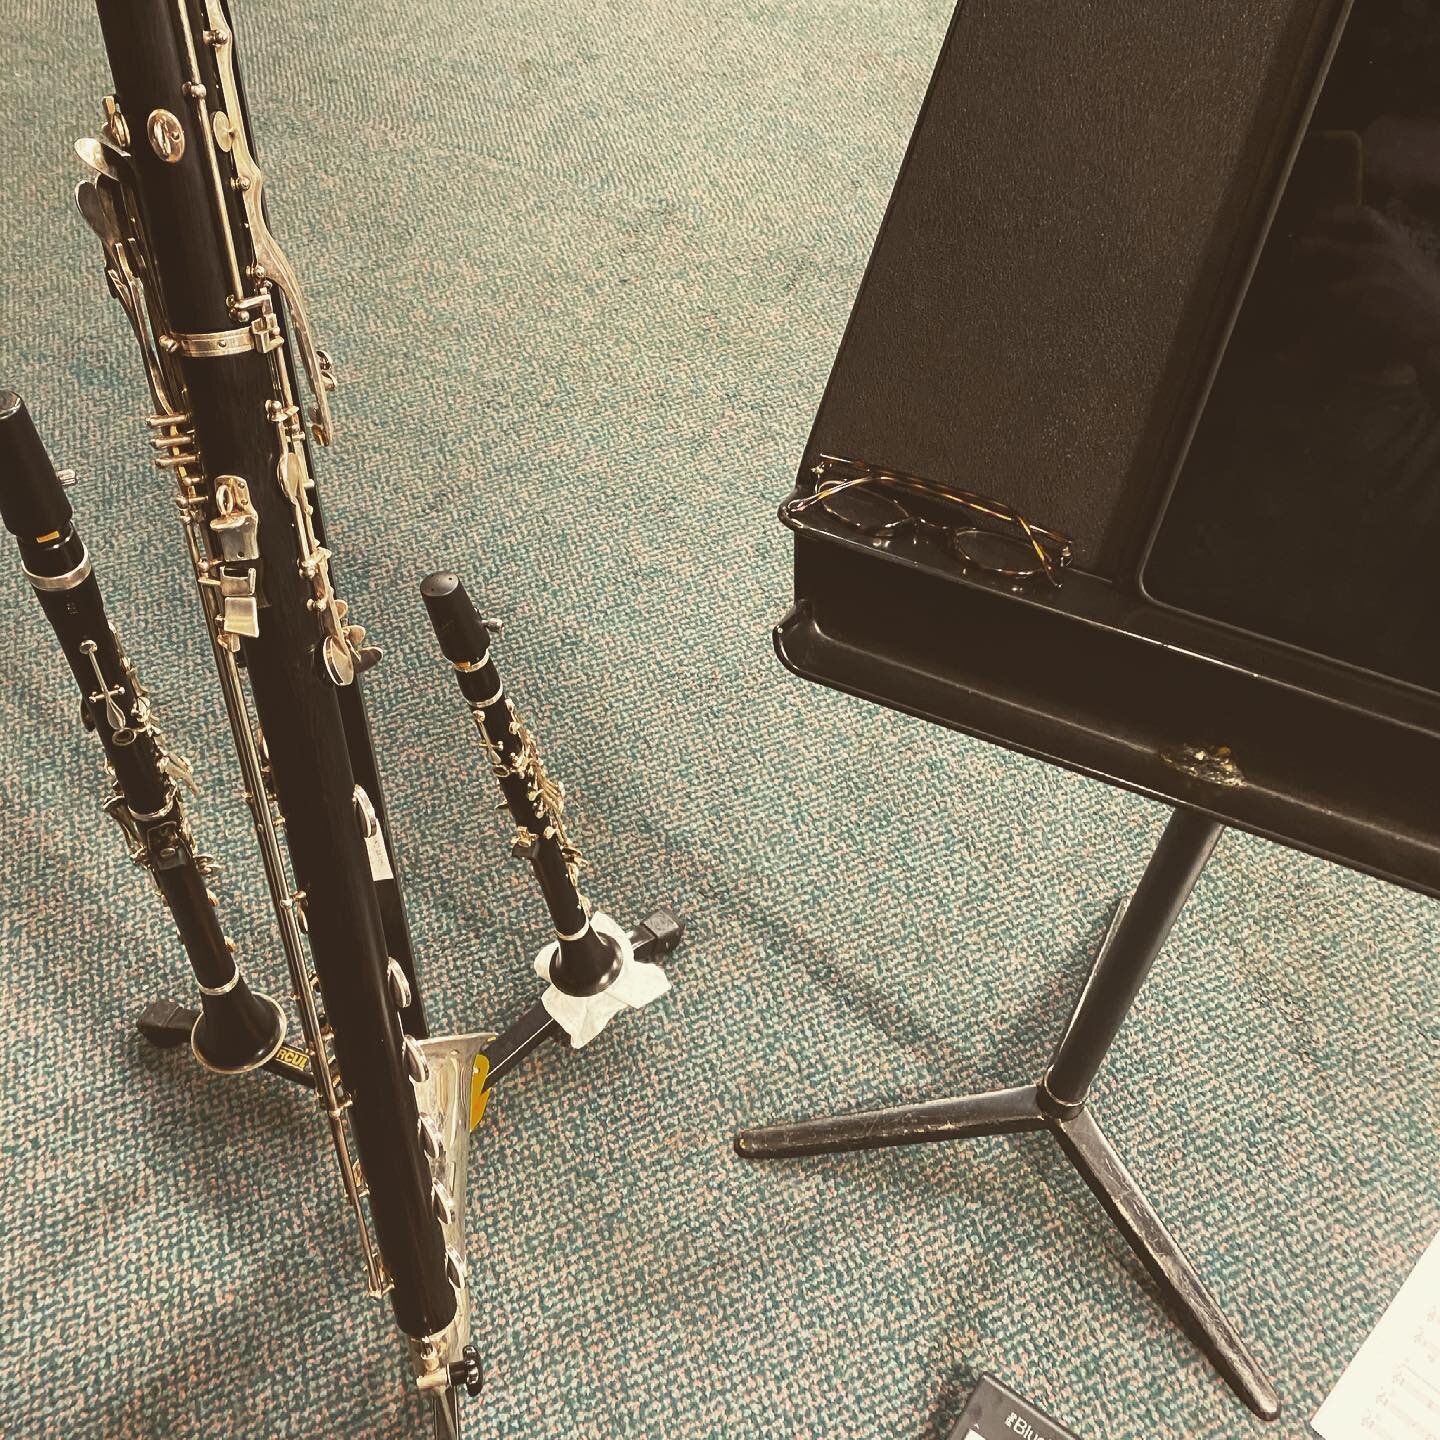 Lovely to be working with @riotensemble workshopping new pieces by students of the @royalacademyofmusic with @danshaoflute and others! 

#contemporarymusic #clarinet #bassclarinet #ebclarinet #doubling #tripling #workshop #riotensemble #composer #cla